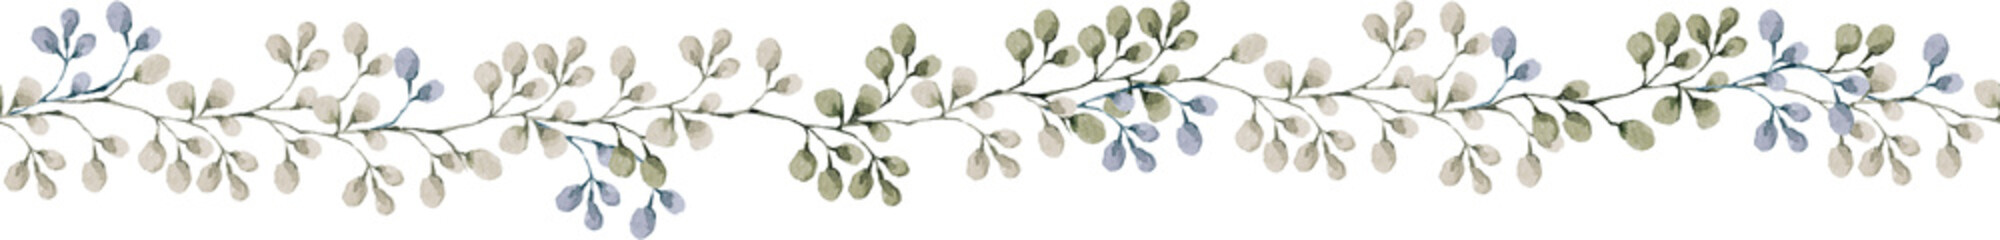 Ivy green leaves long vine watercolor leaves in a long stem or branch swag for a border design.